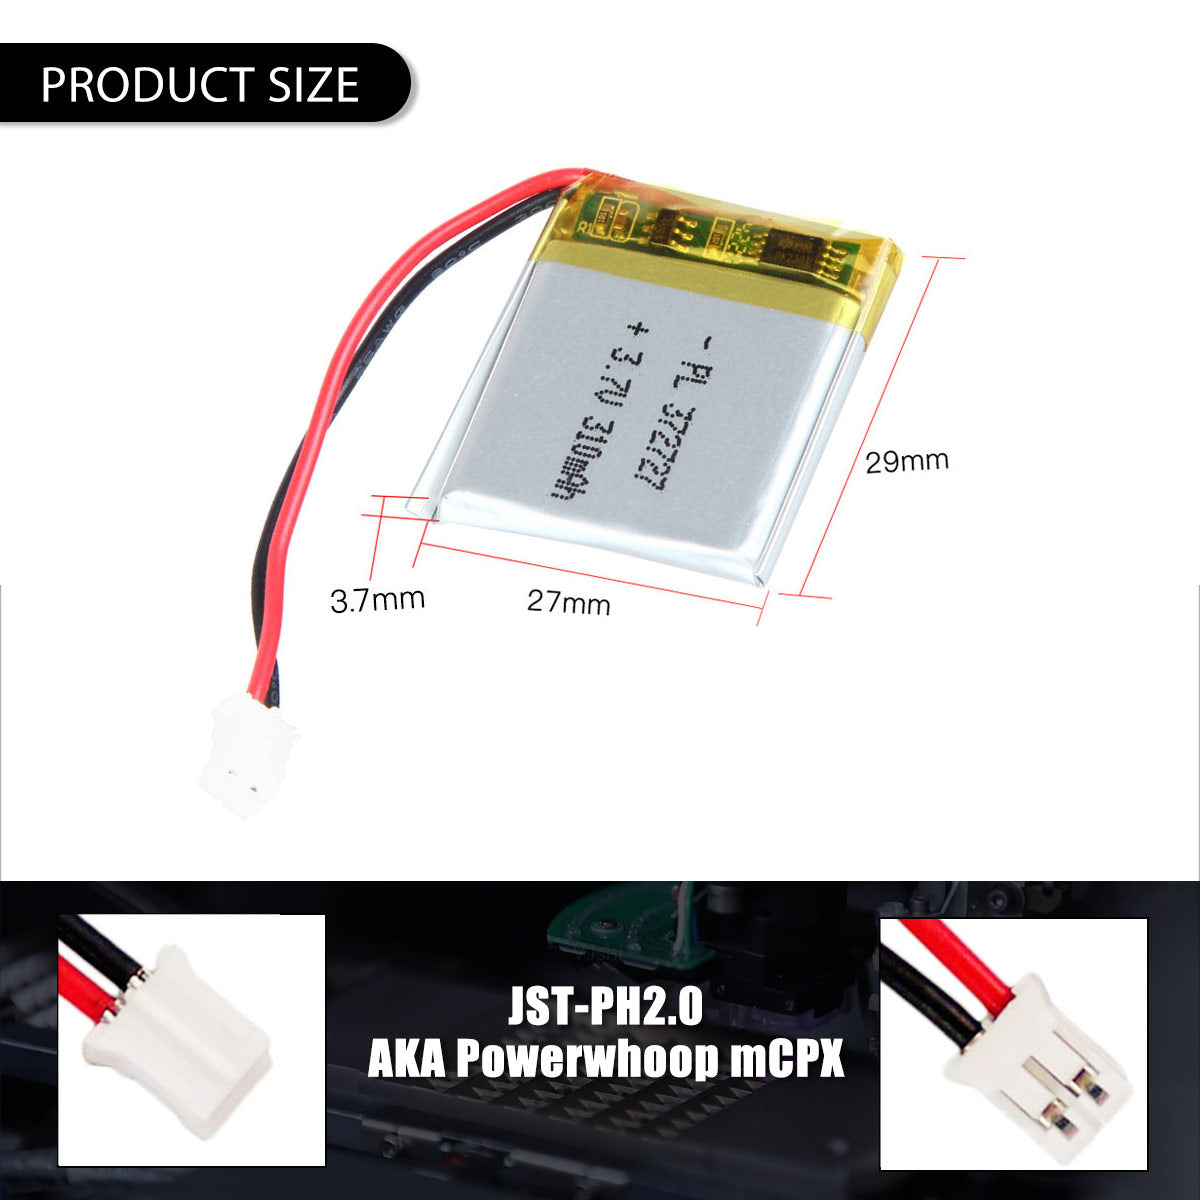 3.7V 310mAh 372727 Rechargeable Lithium Polymer Battery